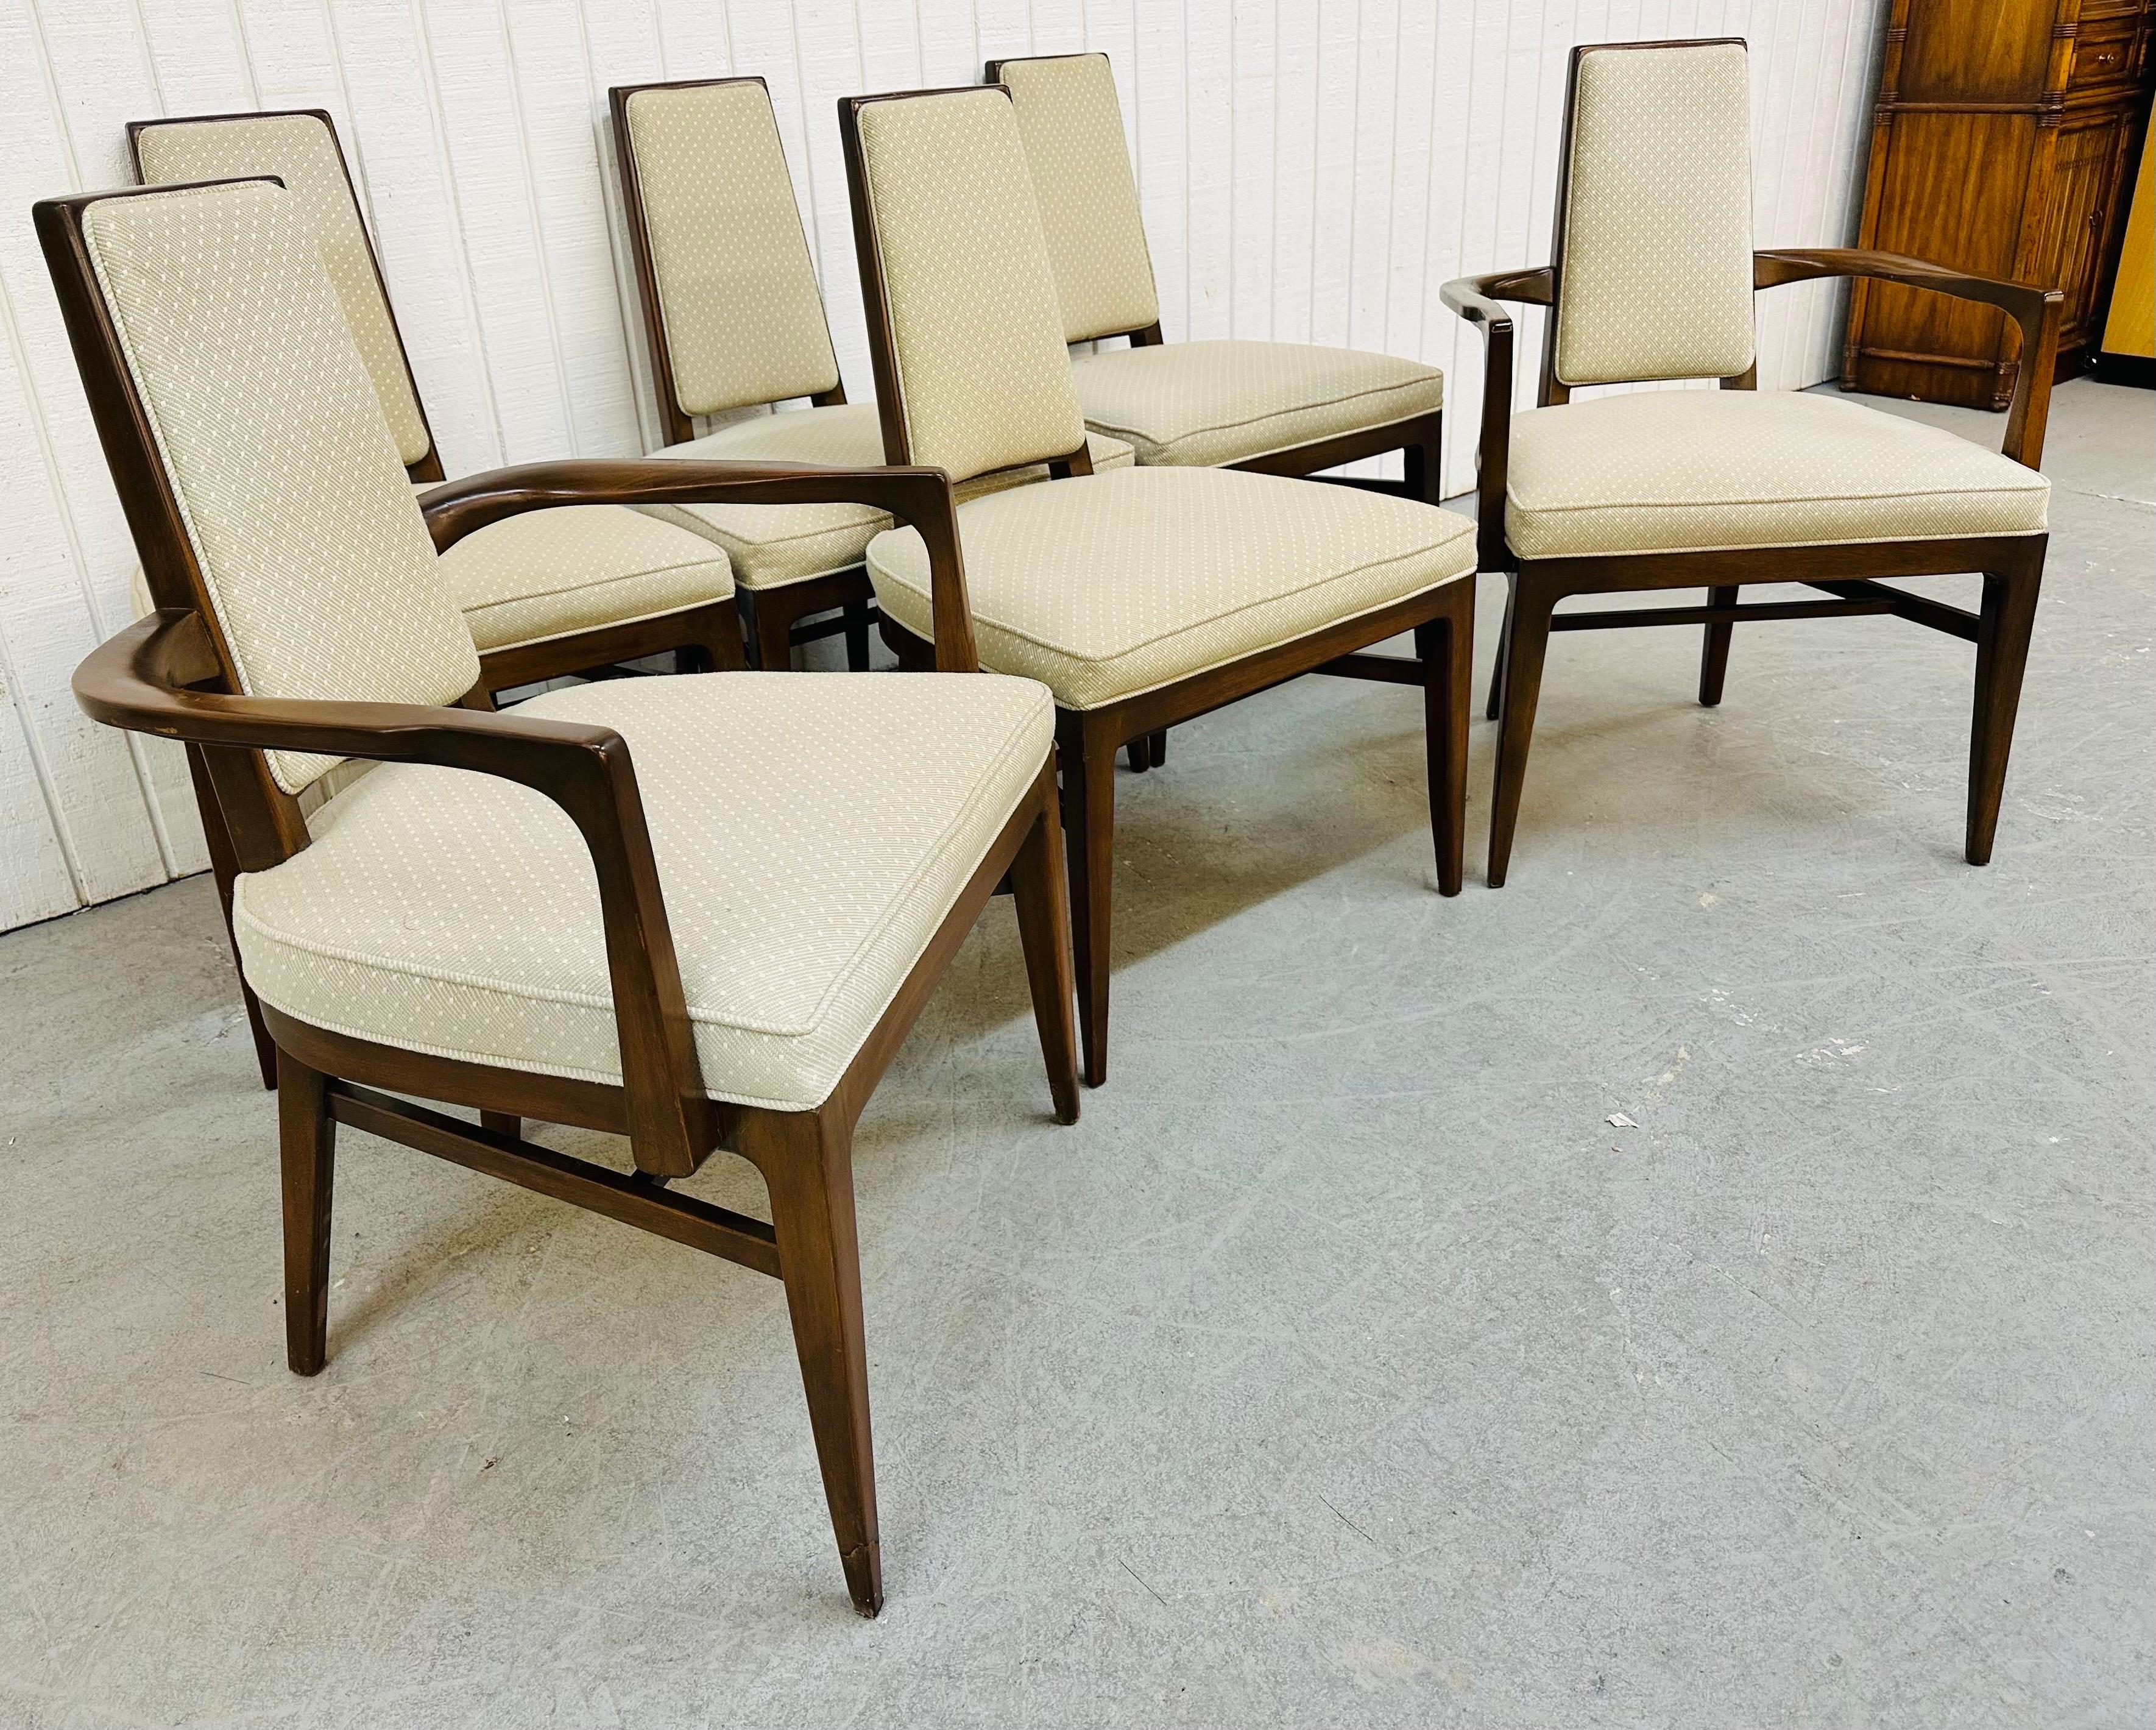 American Mid-Century Modern Pearsall Style Walnut Dining Chairs, Set of 6